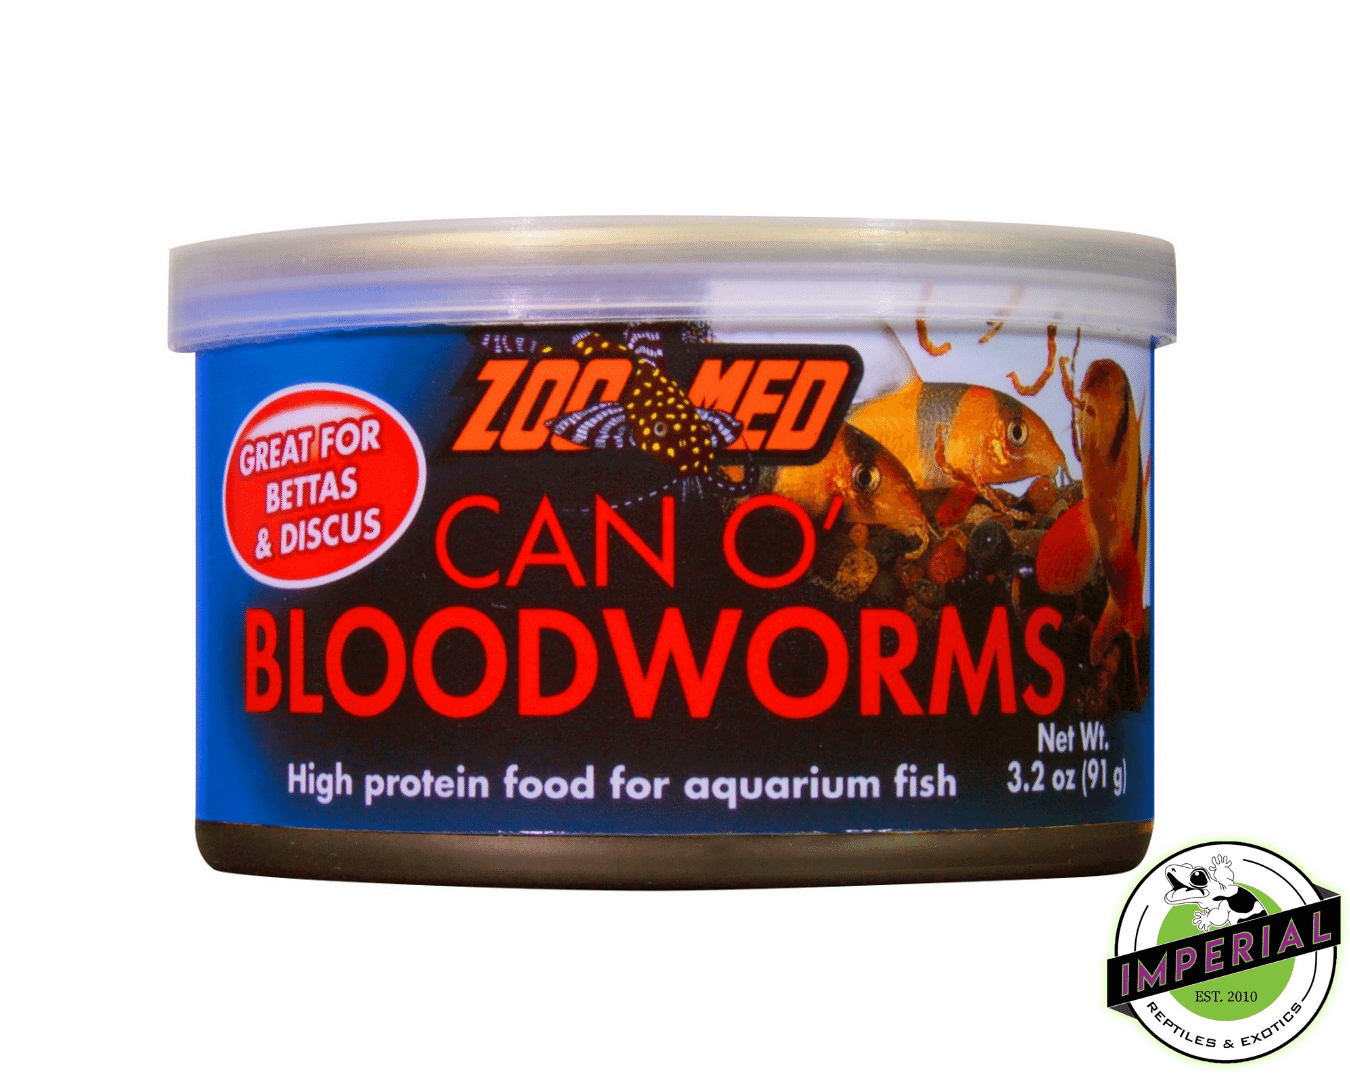 Buy canned bloodworms for sale online at cheap prices. 